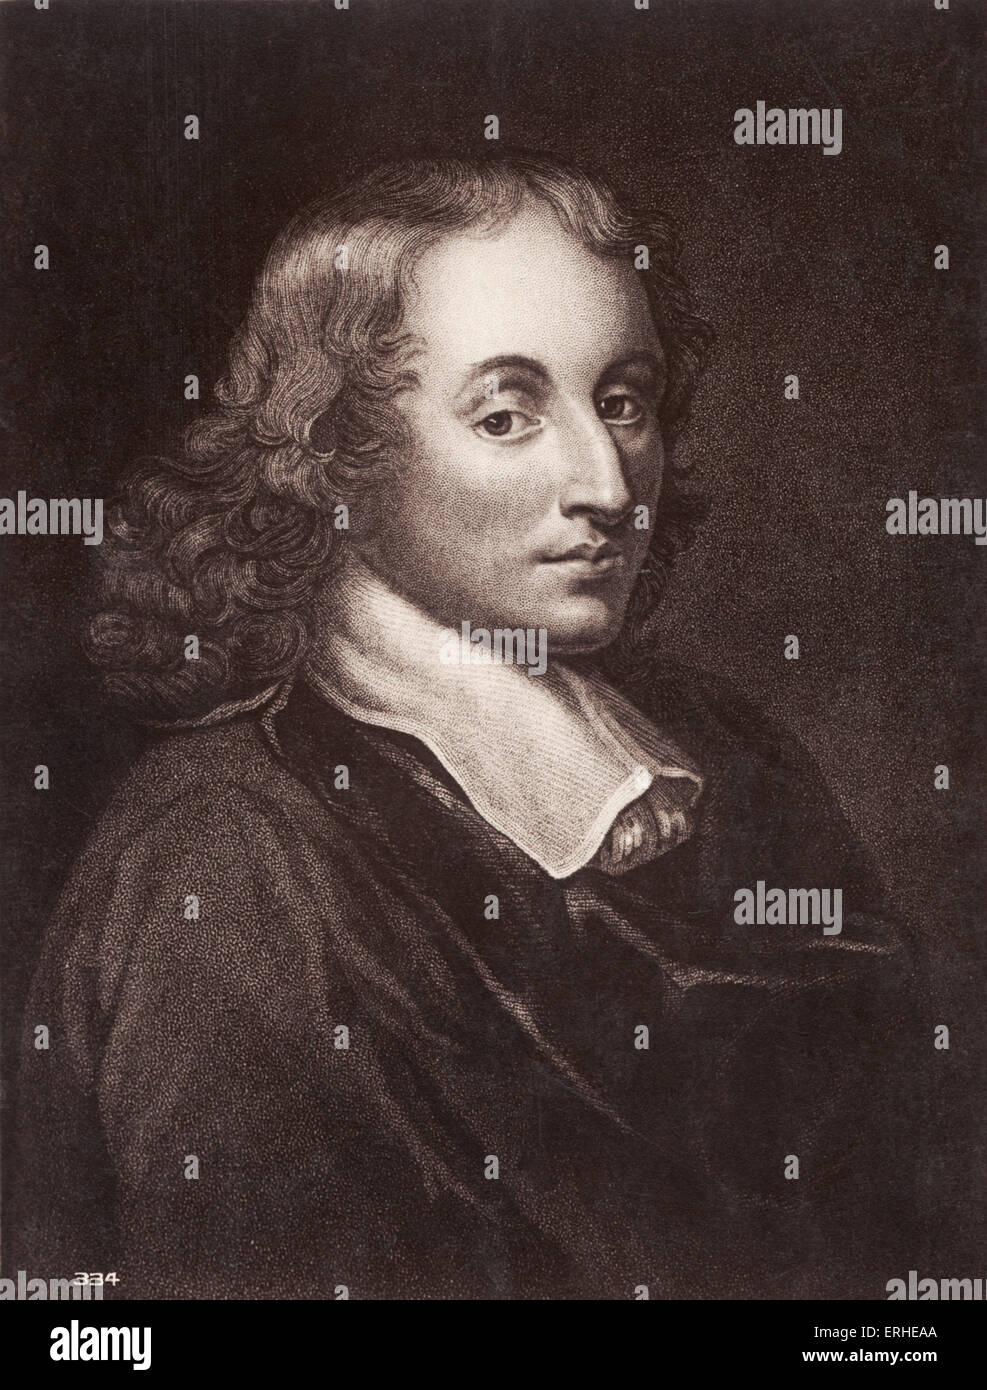 Blaise Pascal - French mathematician, physicist and philosopher 1623-1662.  Engraved portrait. Stock Photo